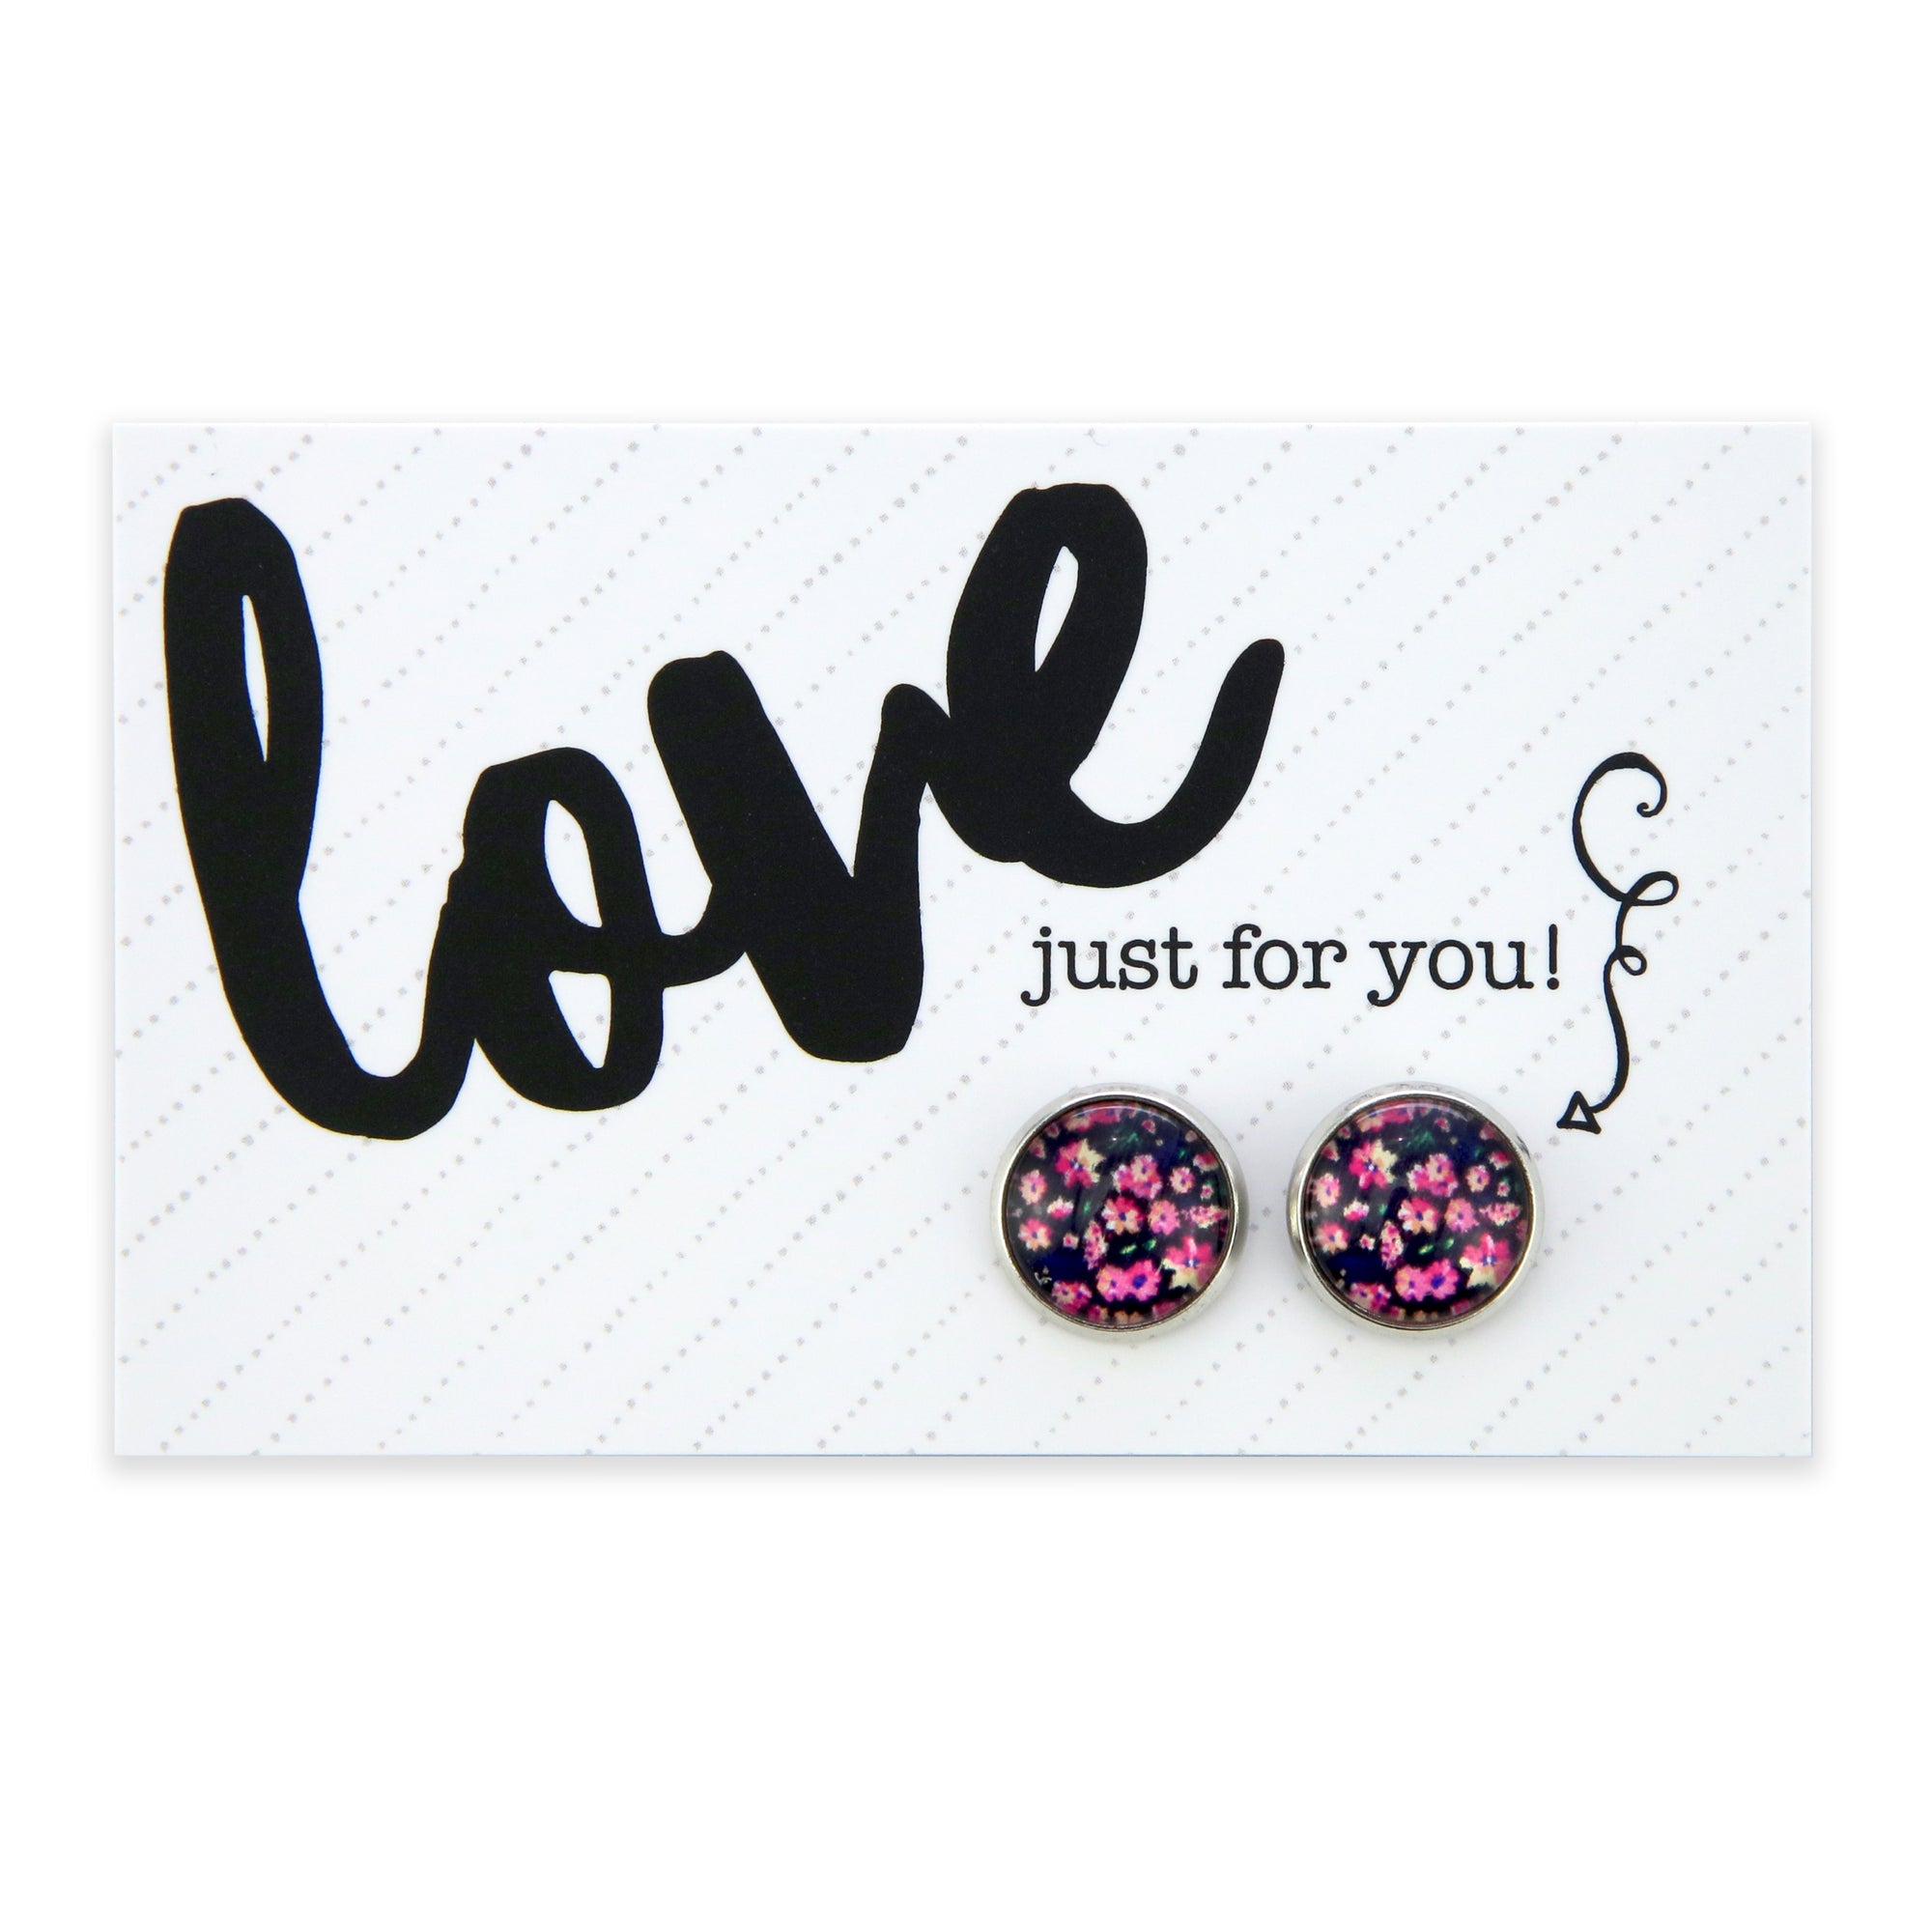 Pink floral earring stud with silver surround and presented on a love gift card.